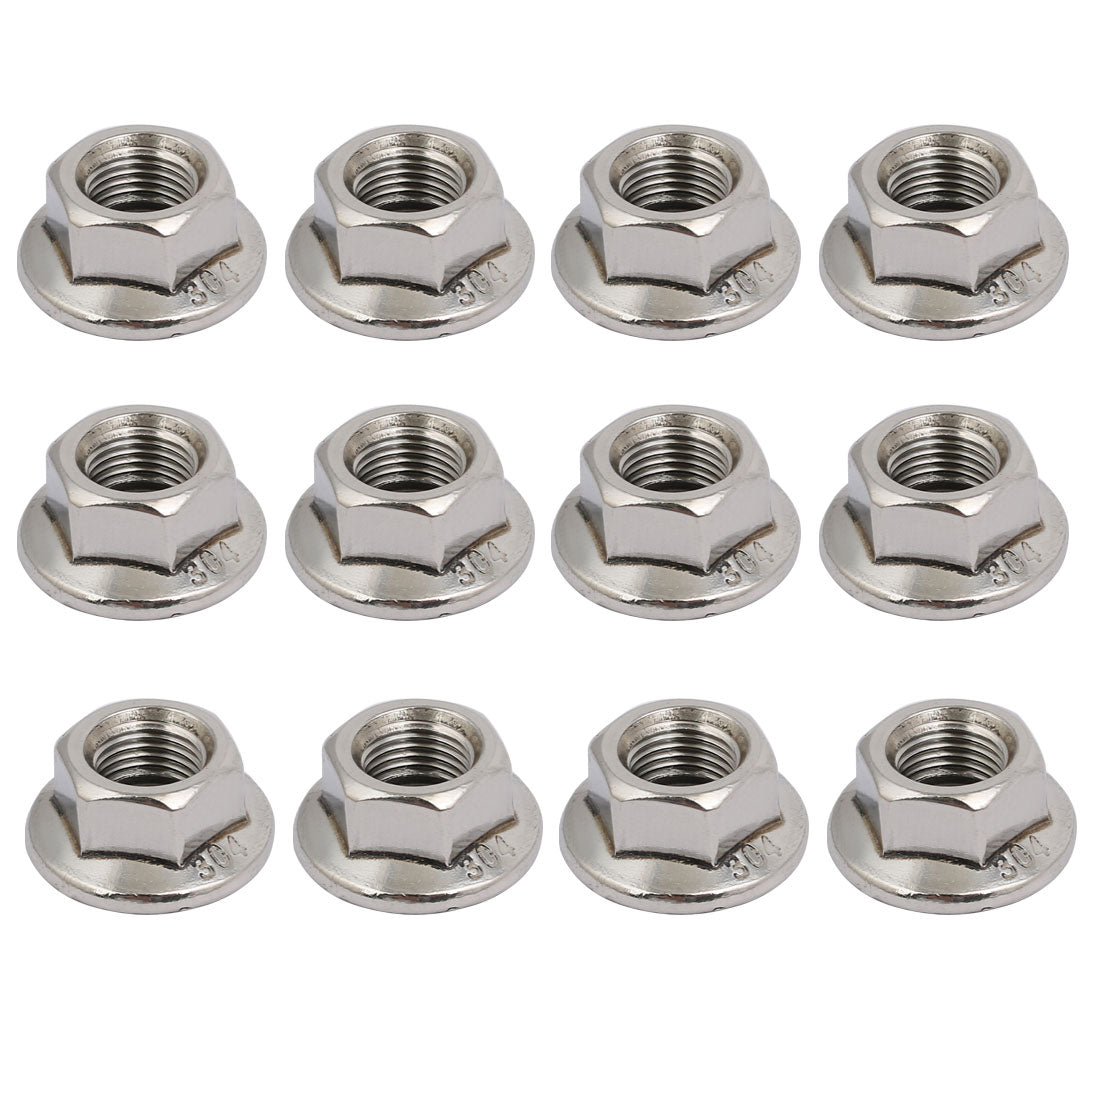 uxcell Uxcell 12pcs M10 x 1.5mm Pitch Metric Fine Thread 304 Stainless Steel Hex Flange Nut